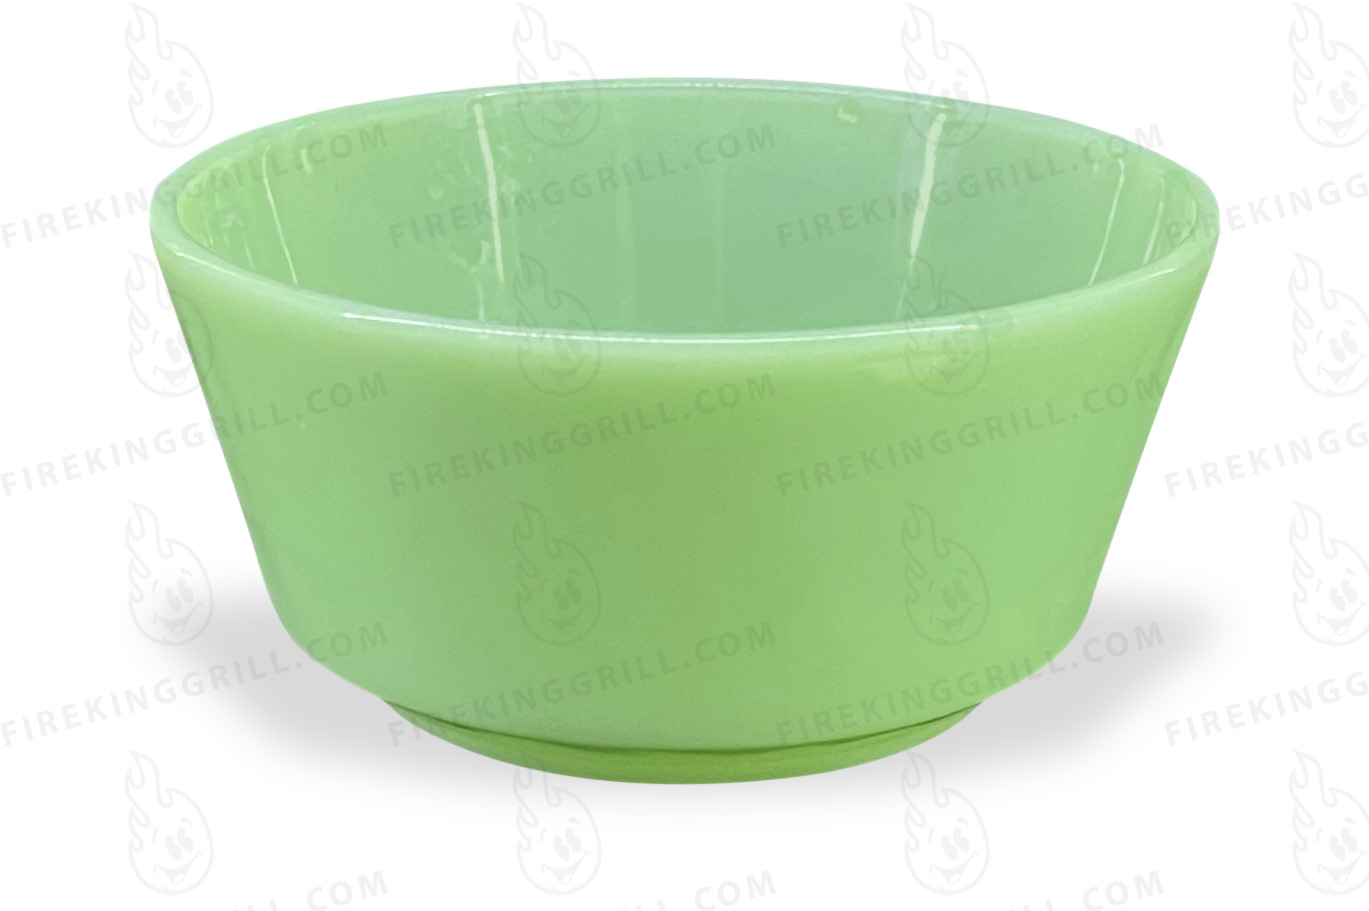 Straight sided bowl